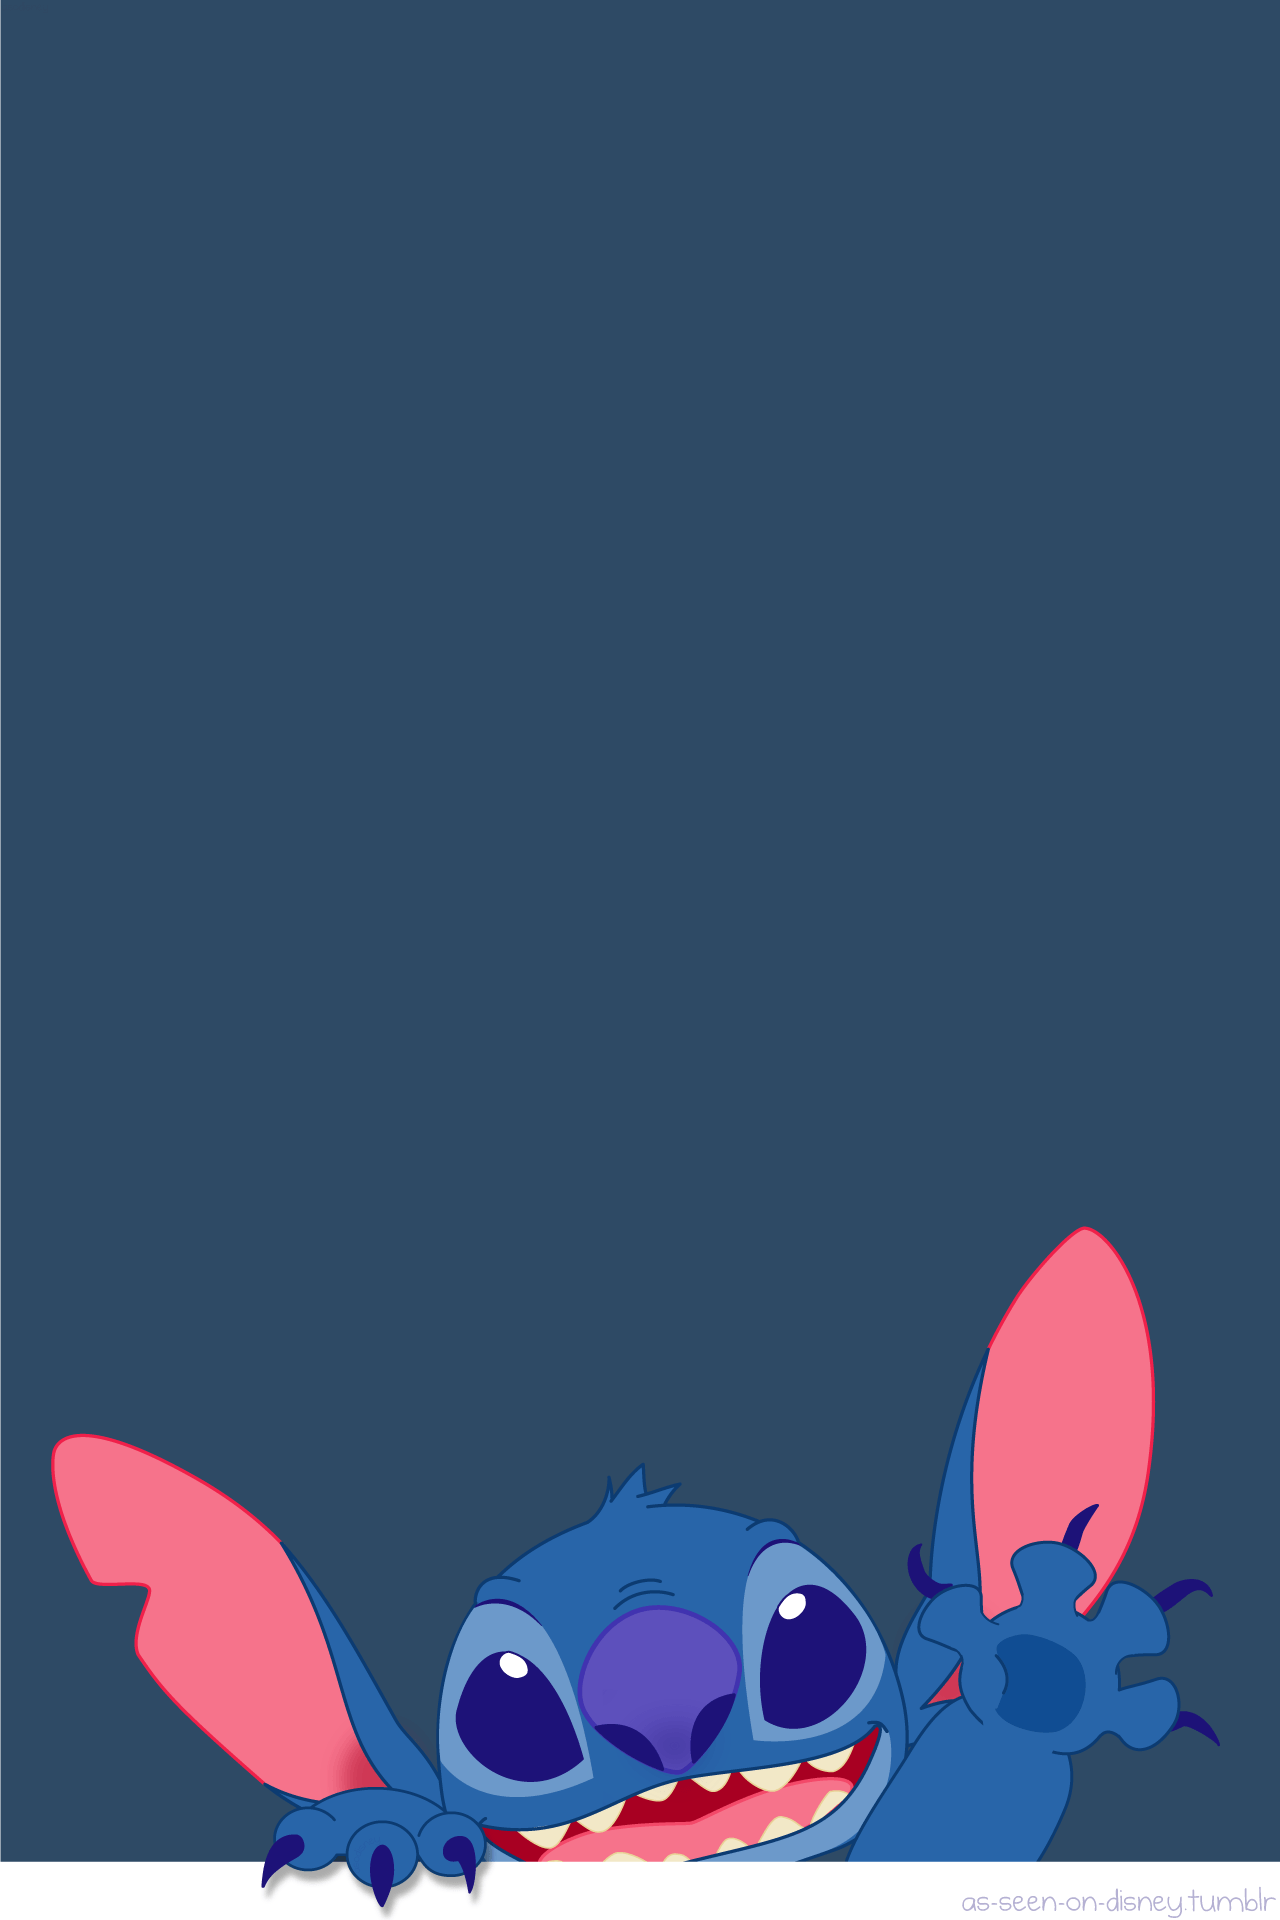 Stitch HD Wallpapers For Mobile 1080x1920  Disney wallpaper Wallpaper  iphone disney Cute wallpapers